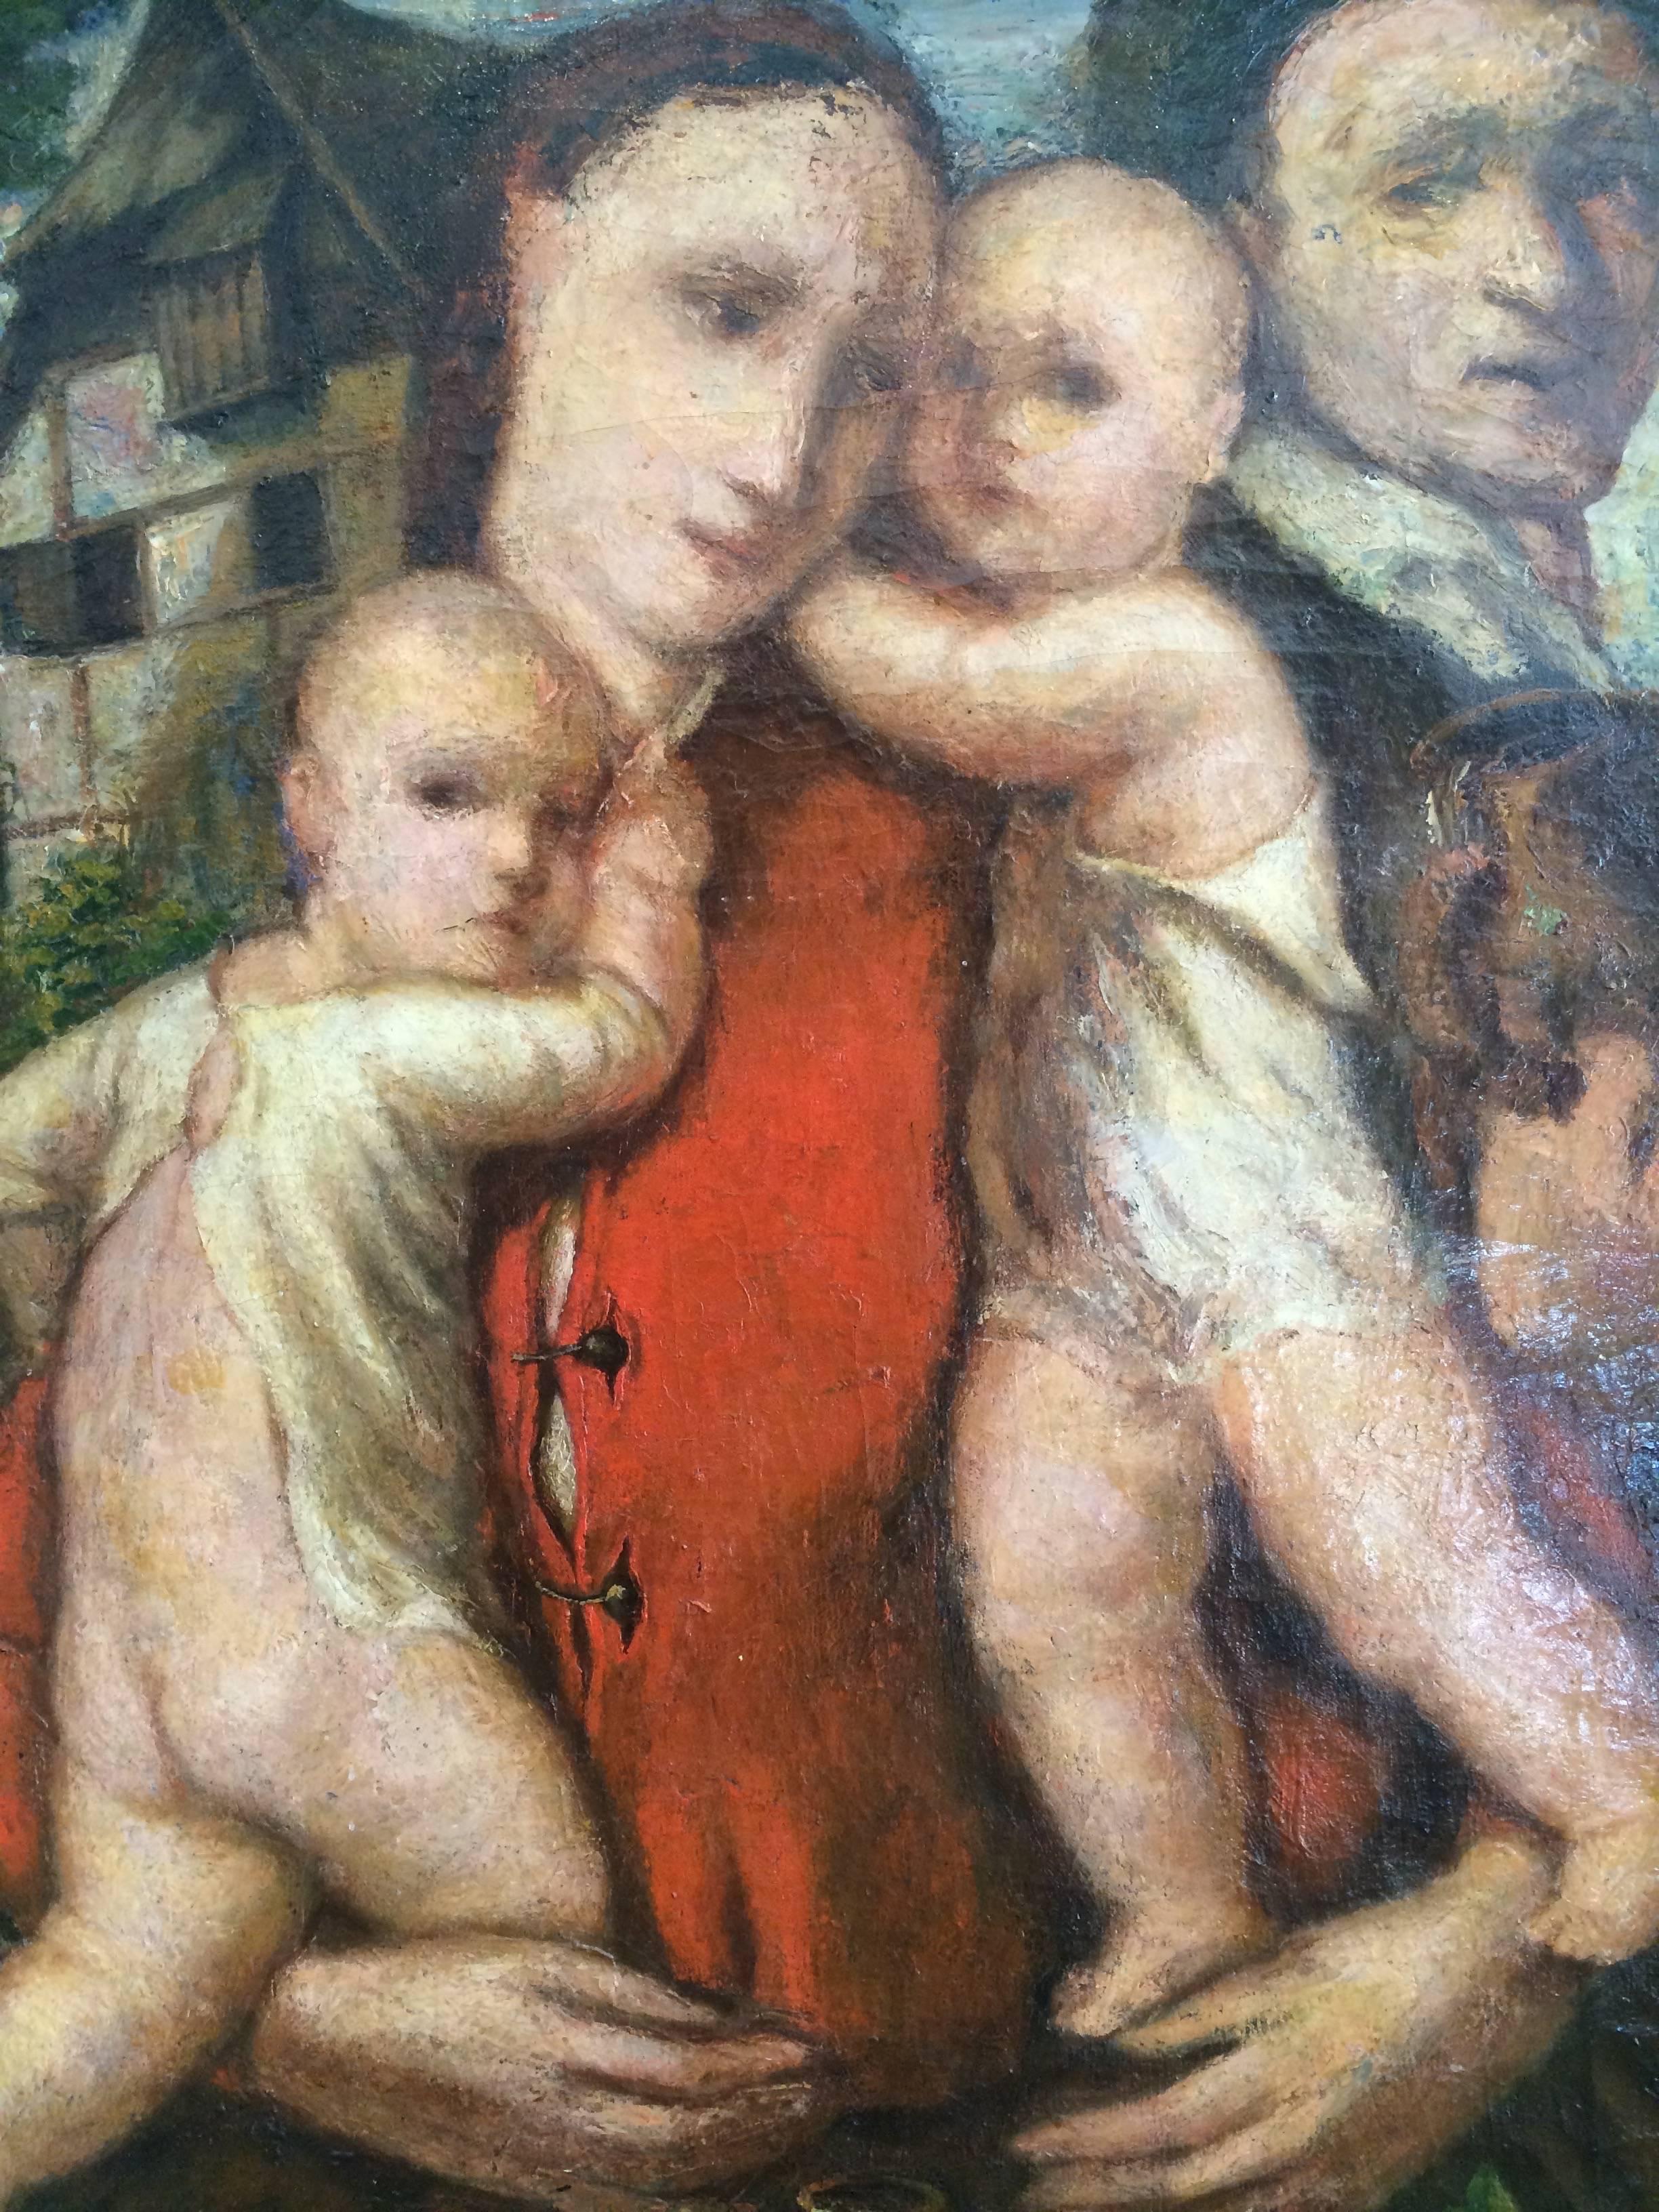 the holy infants embracing